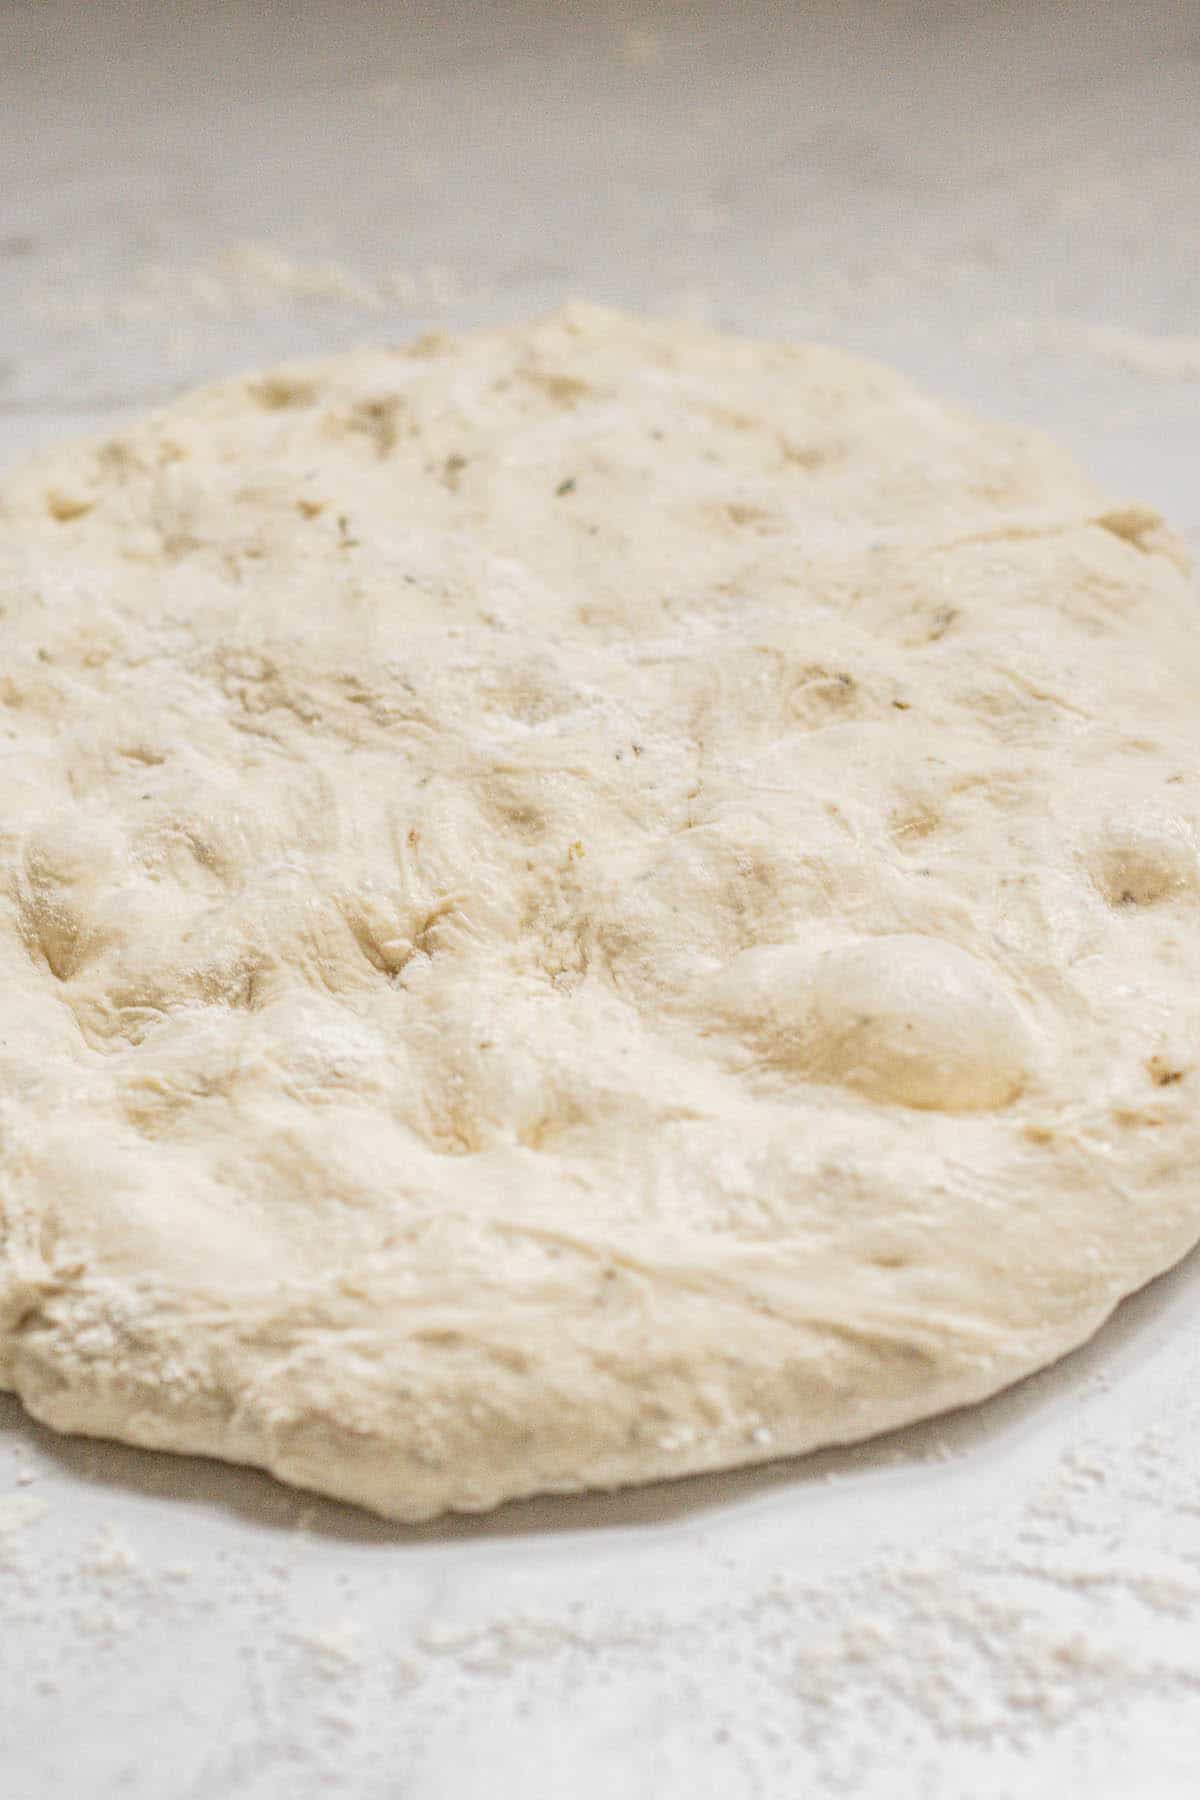 flattened dough on work surface.